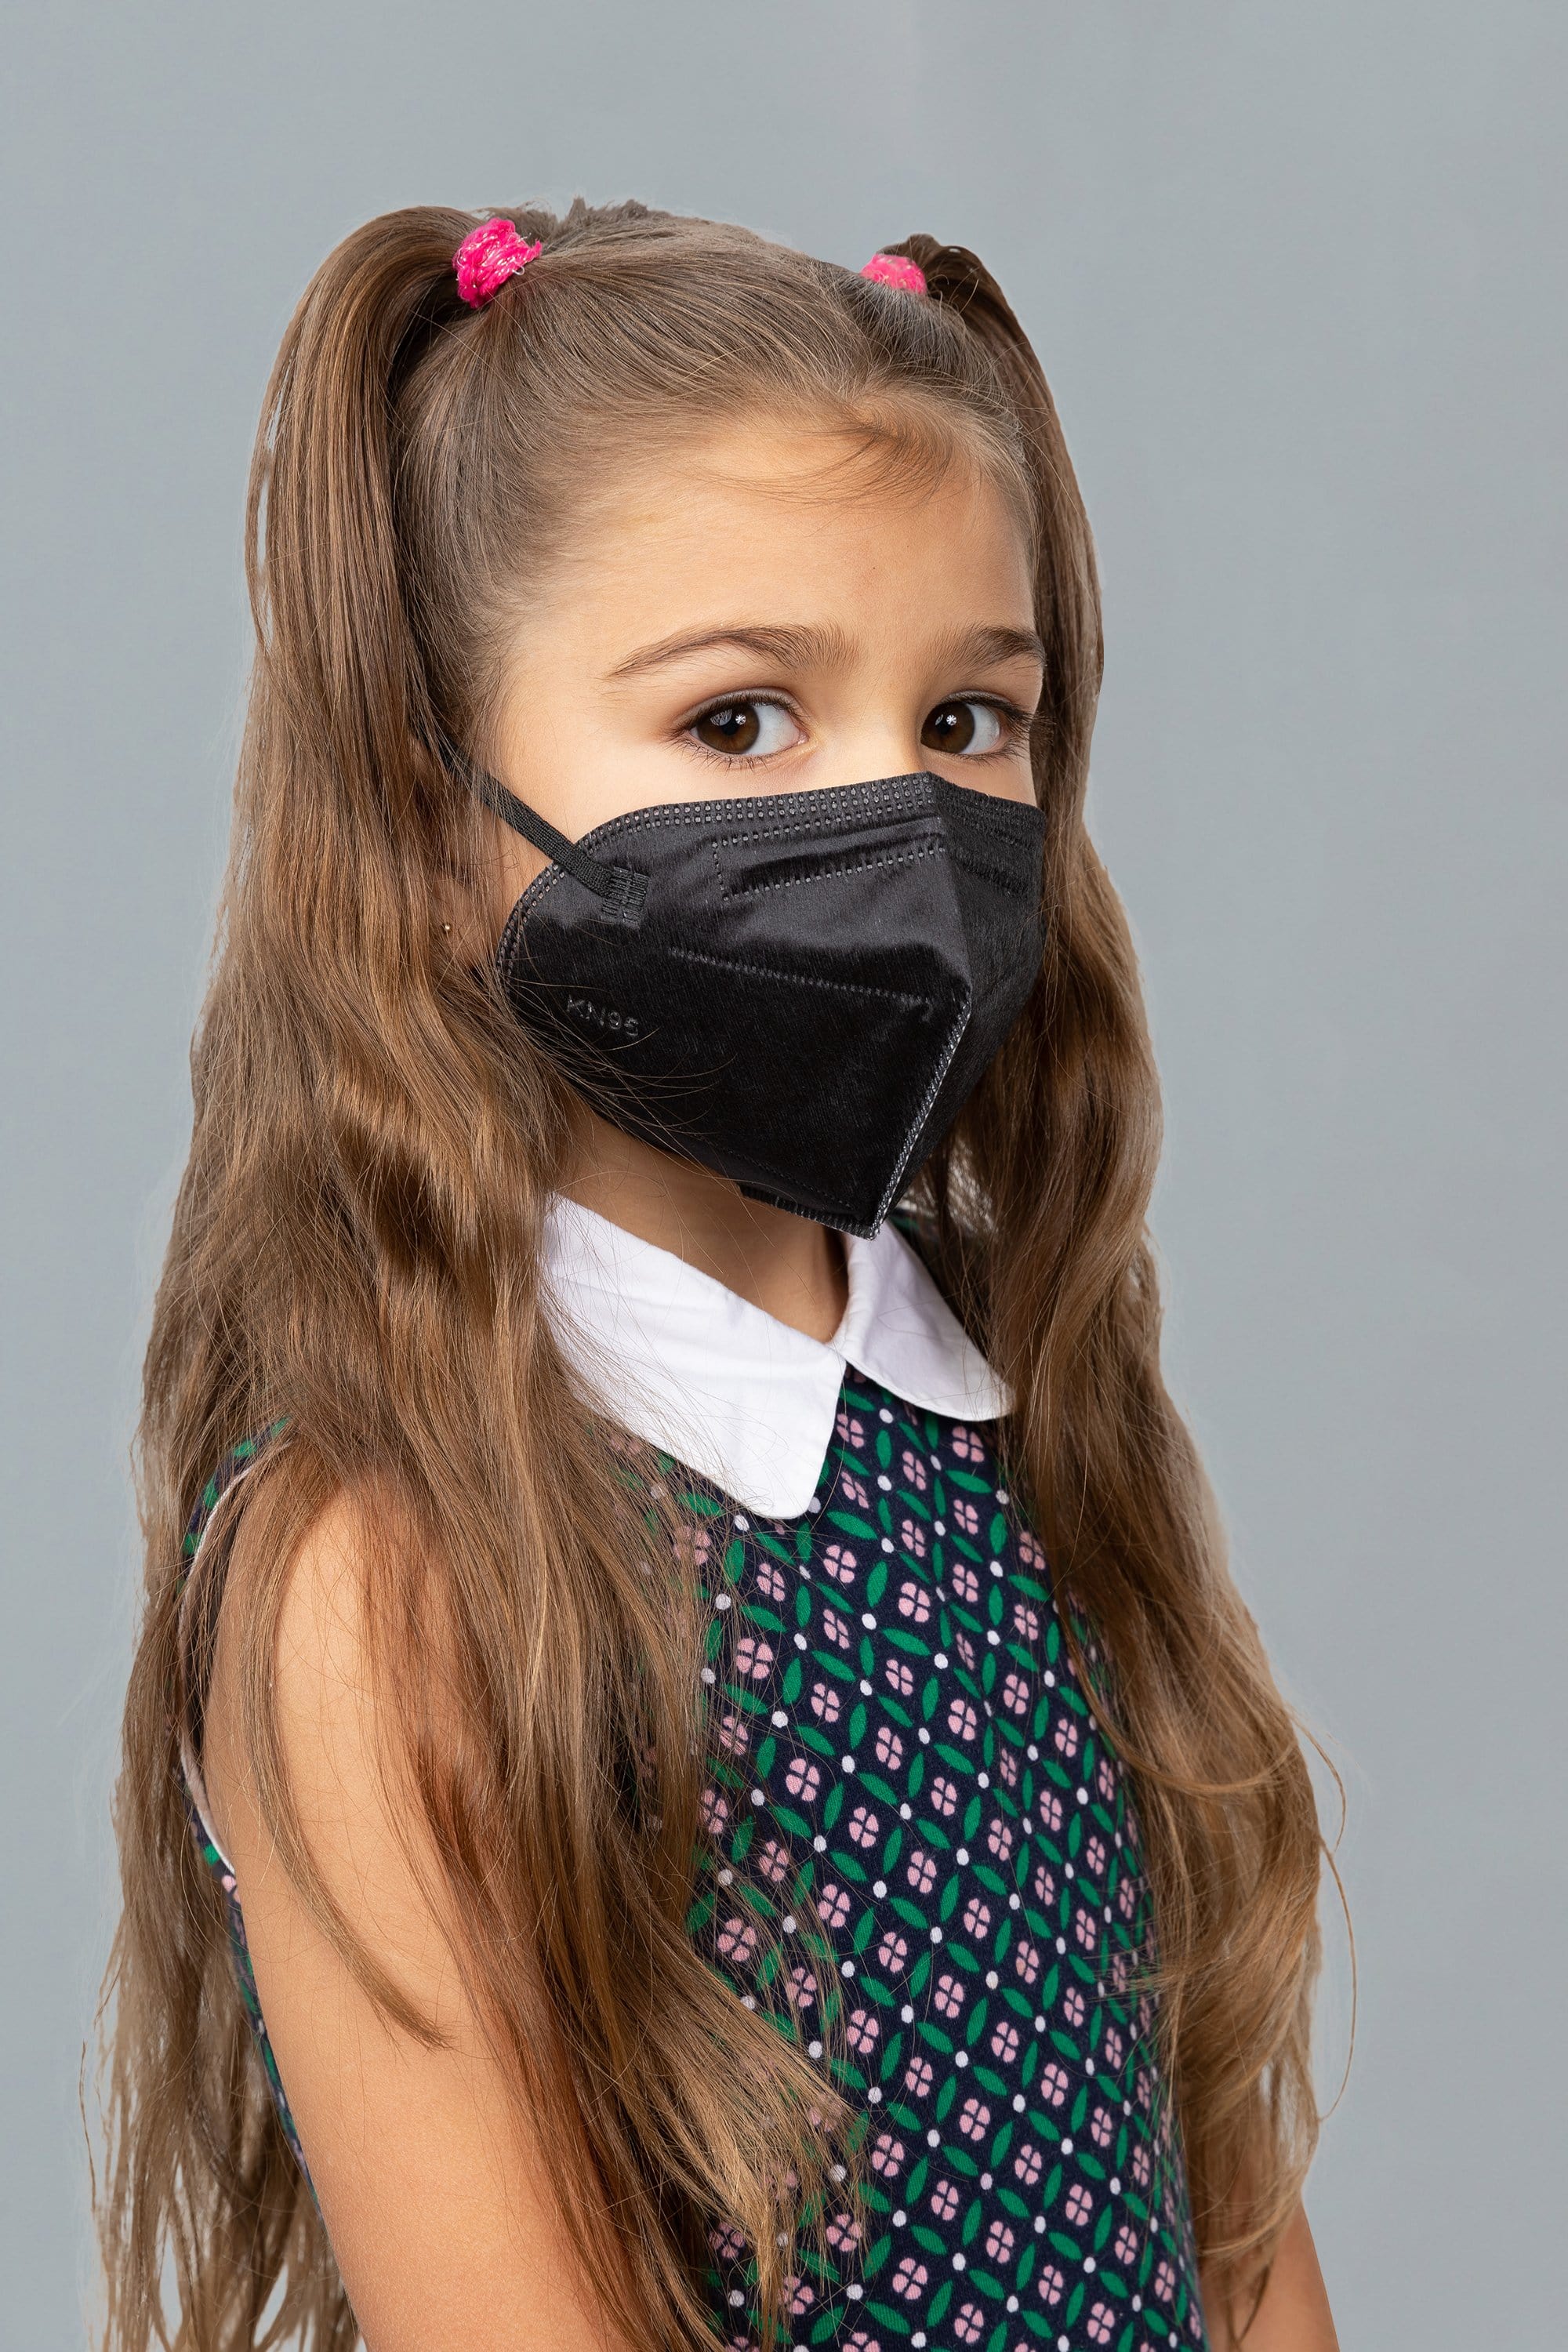 Child wearing stylish kid sized Black KN95 face mask, with high quality breathable fabric. 